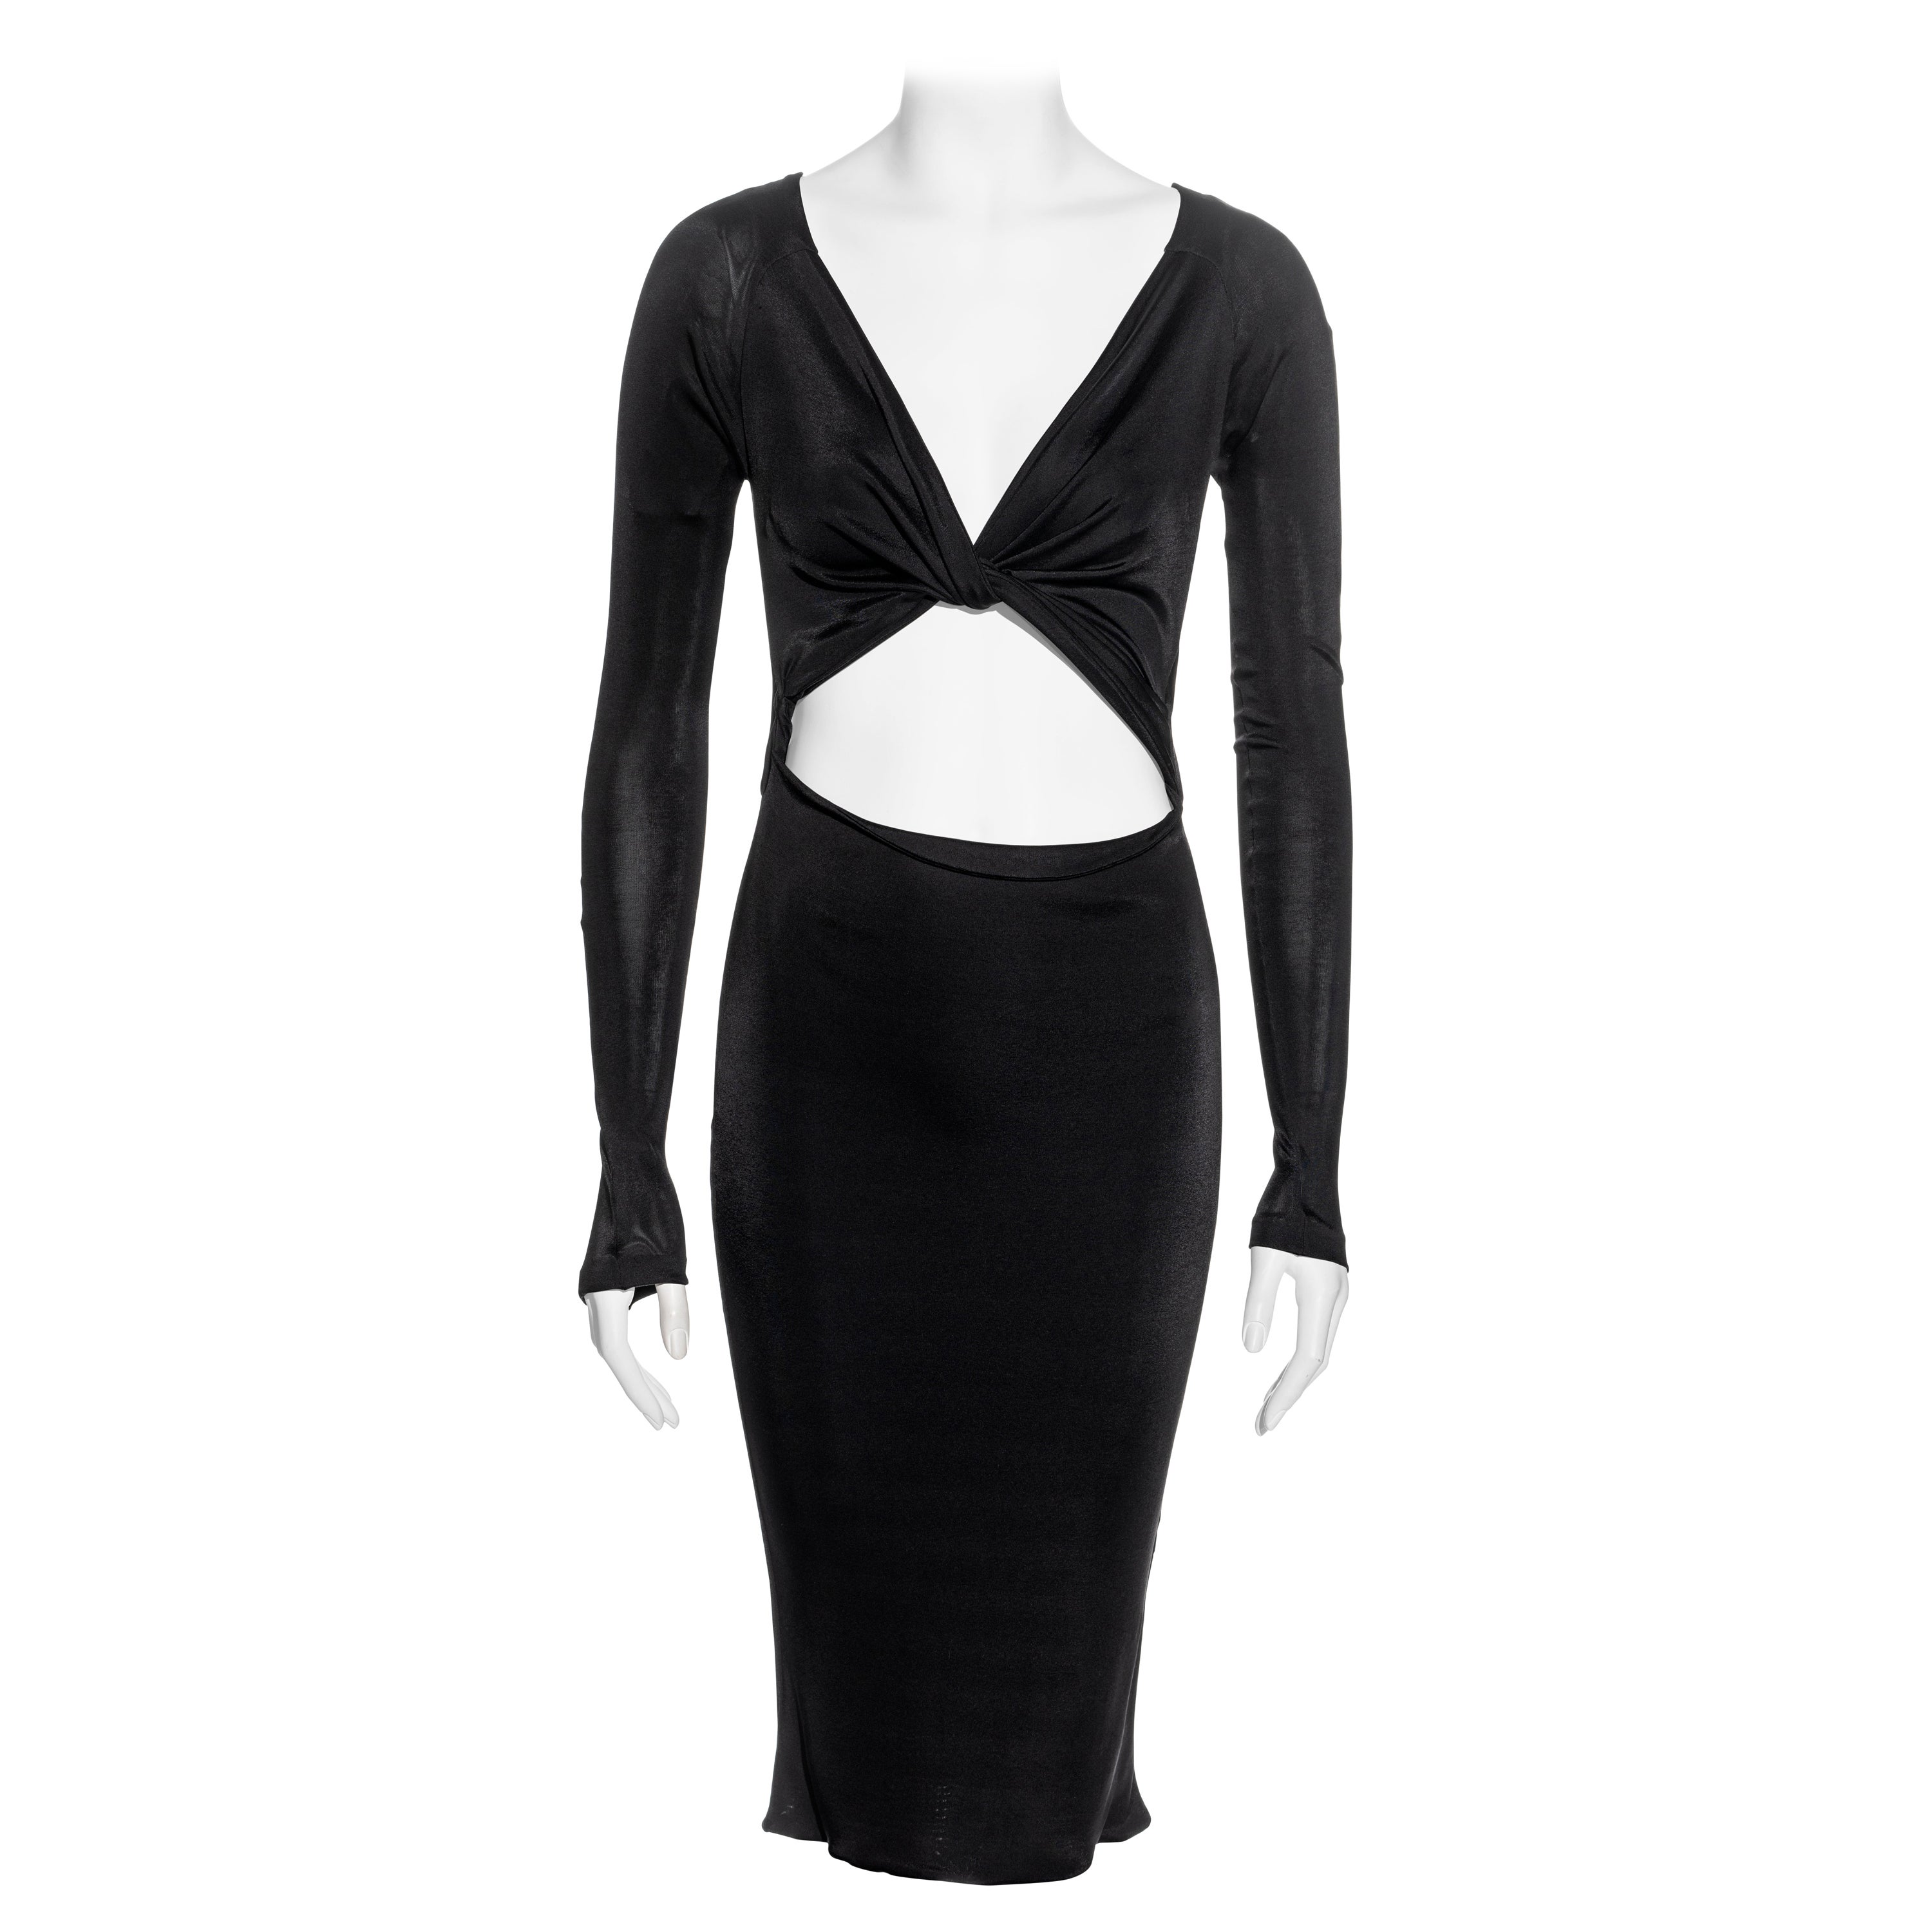 Gucci by Tom Ford black bare midriff long sleeve evening dress, fw 2003